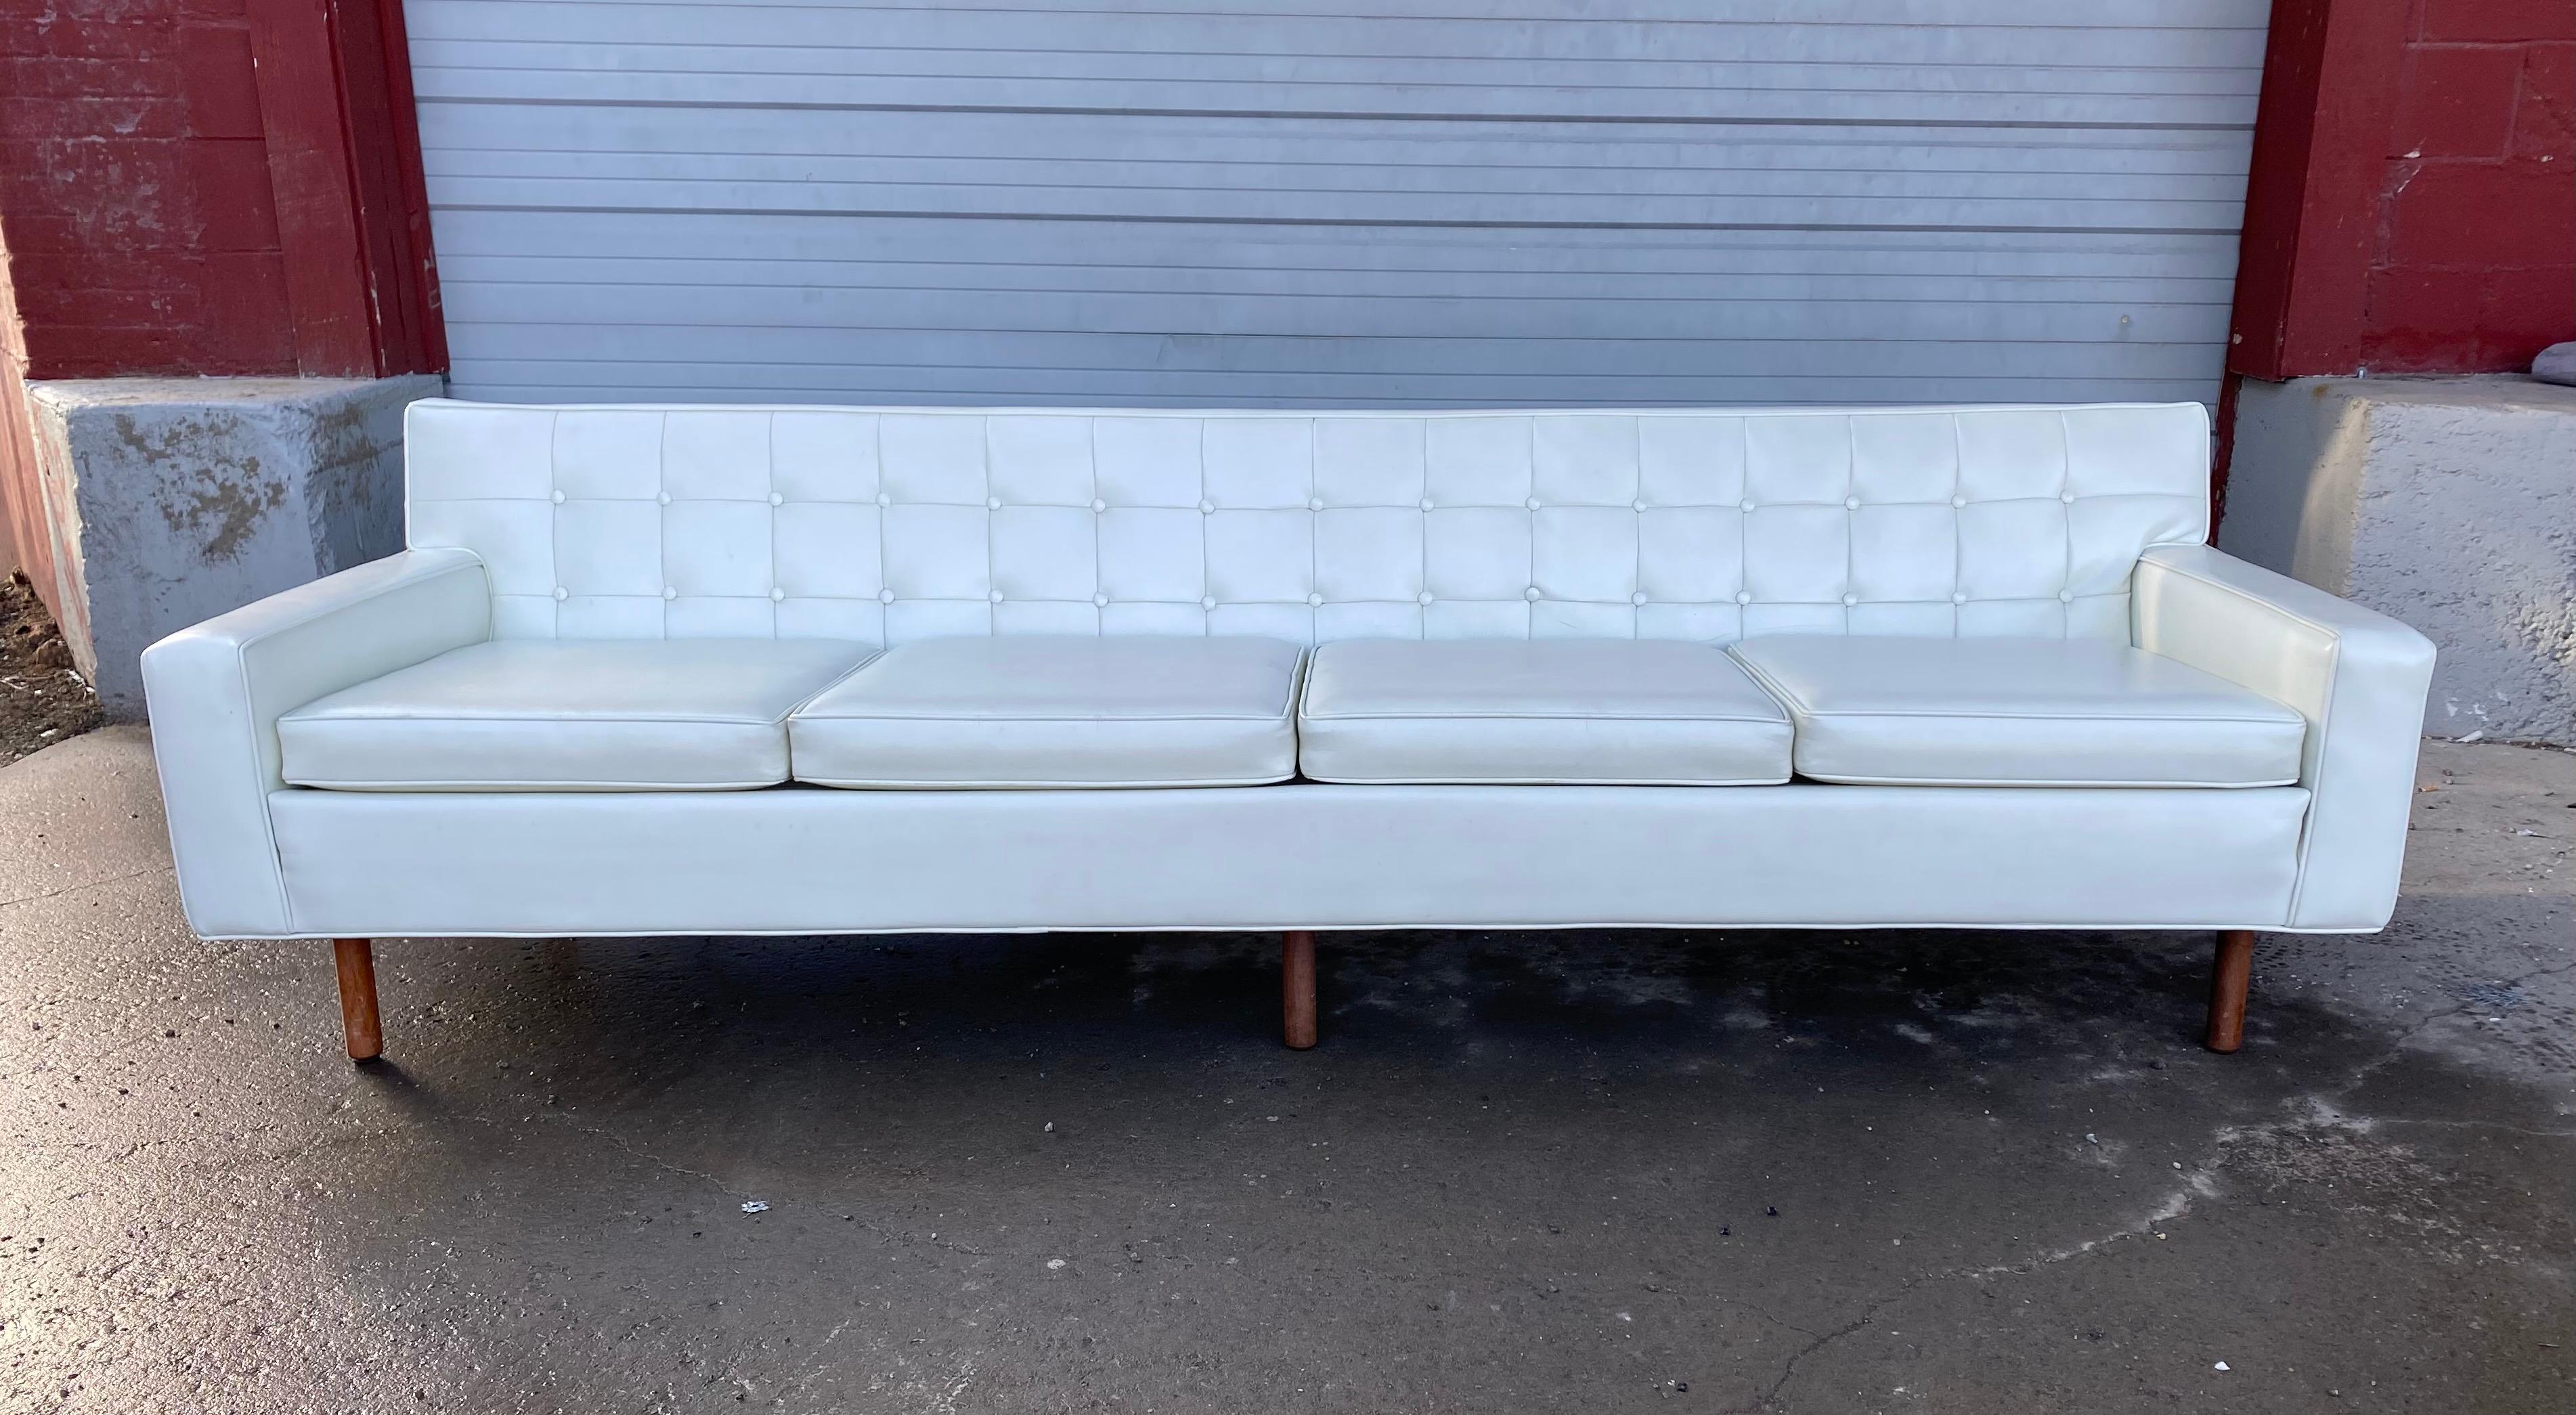 Stunning button tufted 4-seat sofa by Milo Baughman for Thayer Coggen. Classic Mid-Century Modern design, nice original condition, retains original white Naugahyde as well as original Thayer Coggen label, minor nik to back (see photo), hand delivery